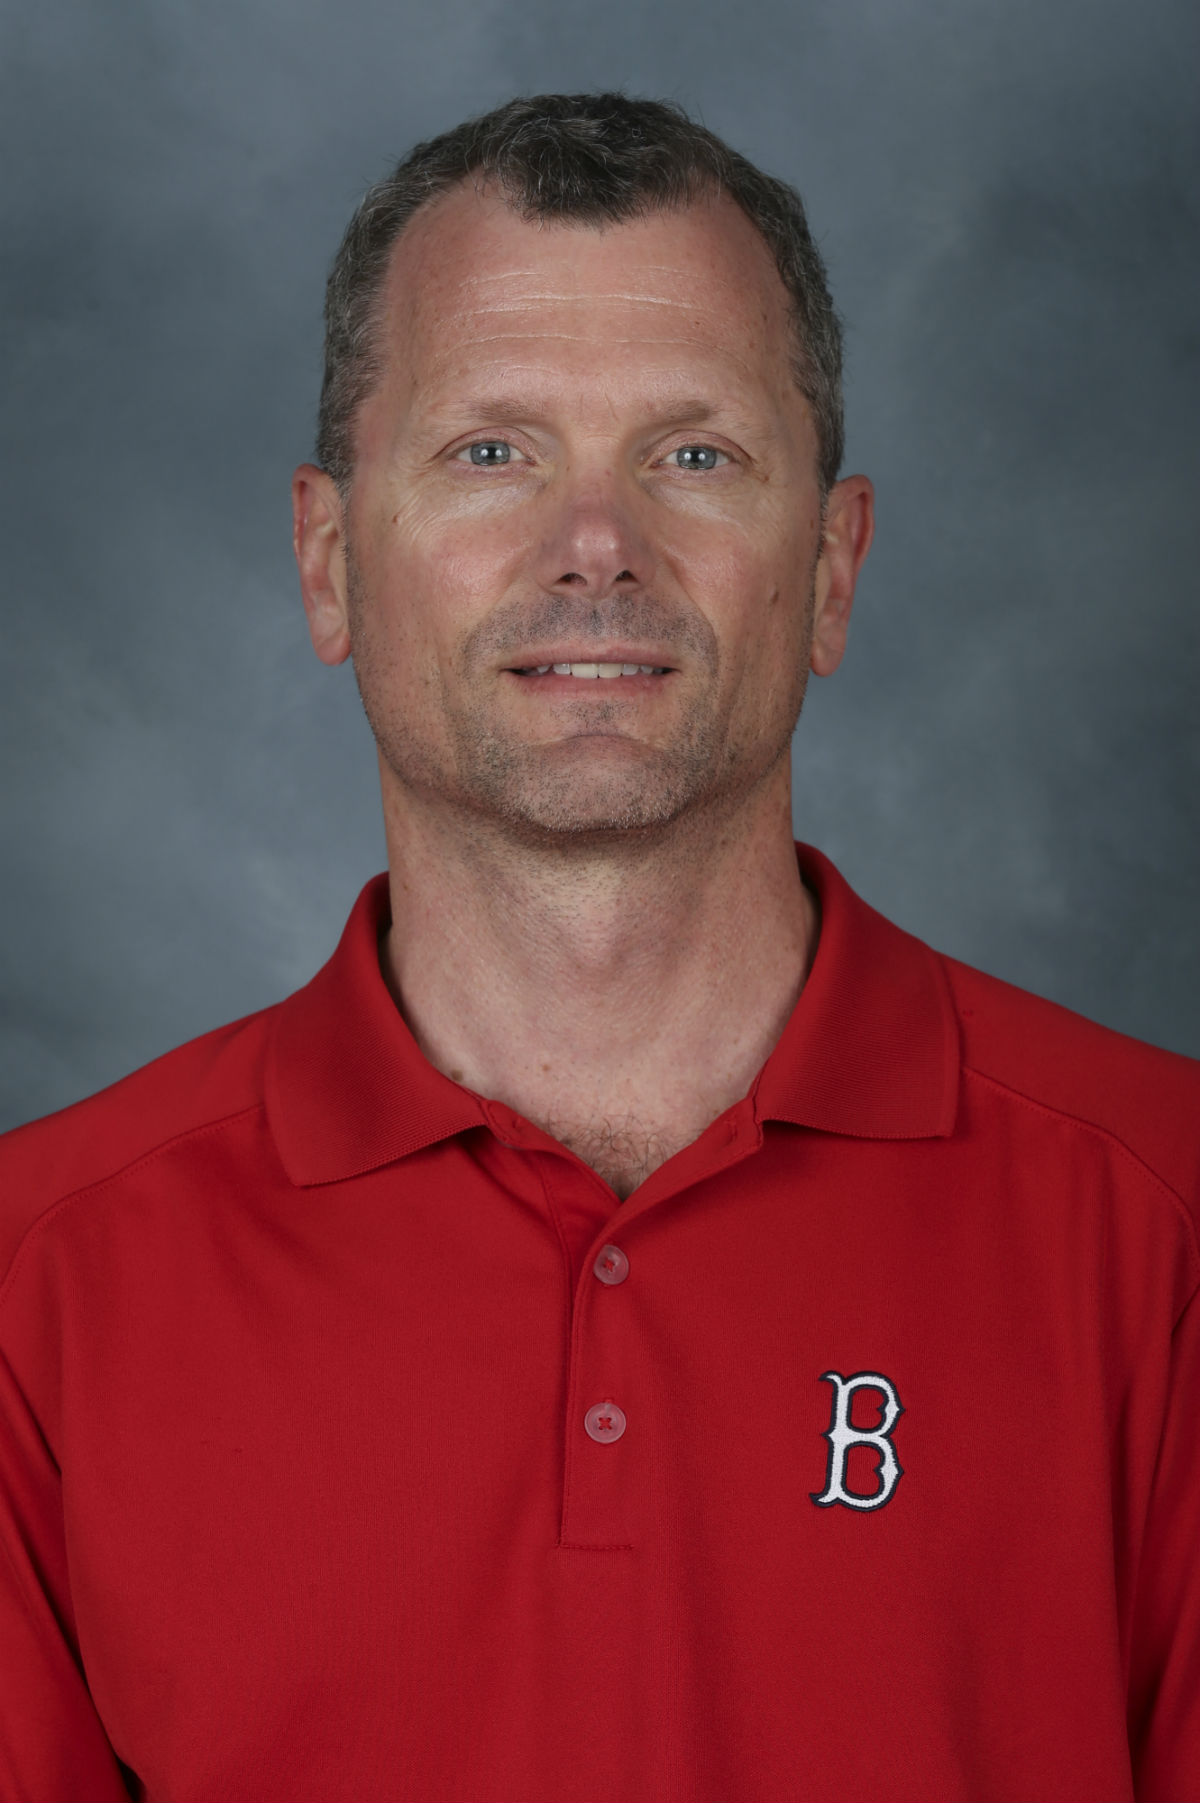 Boston Red Sox Major League Physical Therapist and Clinical Assistant Professor Dr. Ray Mattfeld